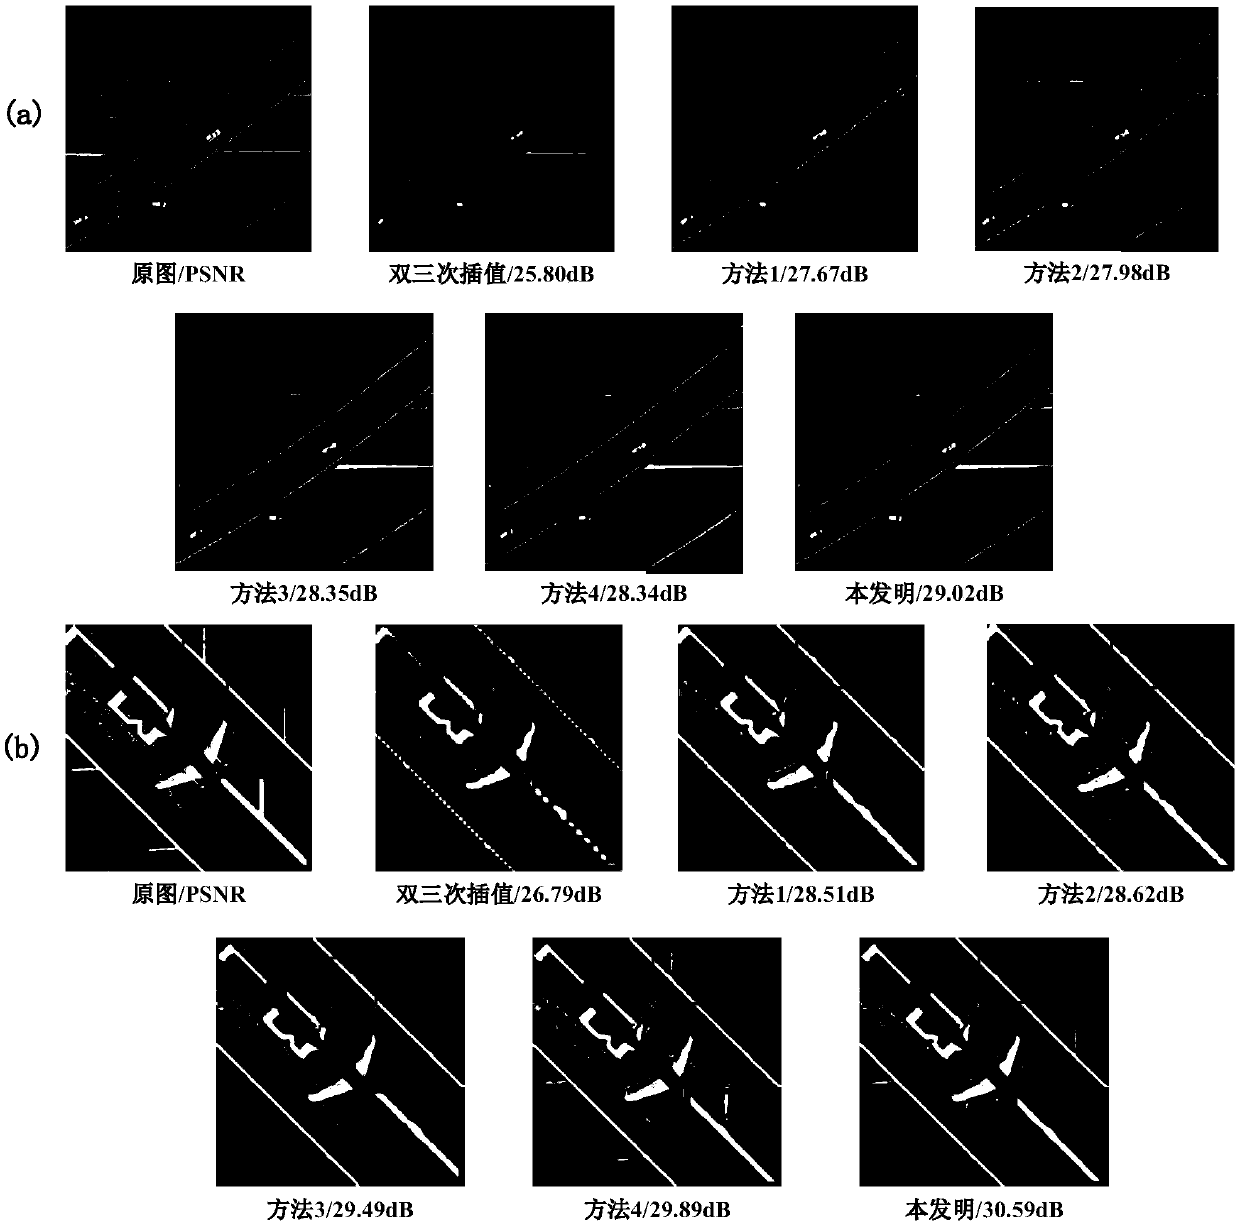 A remote sensing image super-resolution reconstruction method based on a convolutional neural network of channel attention